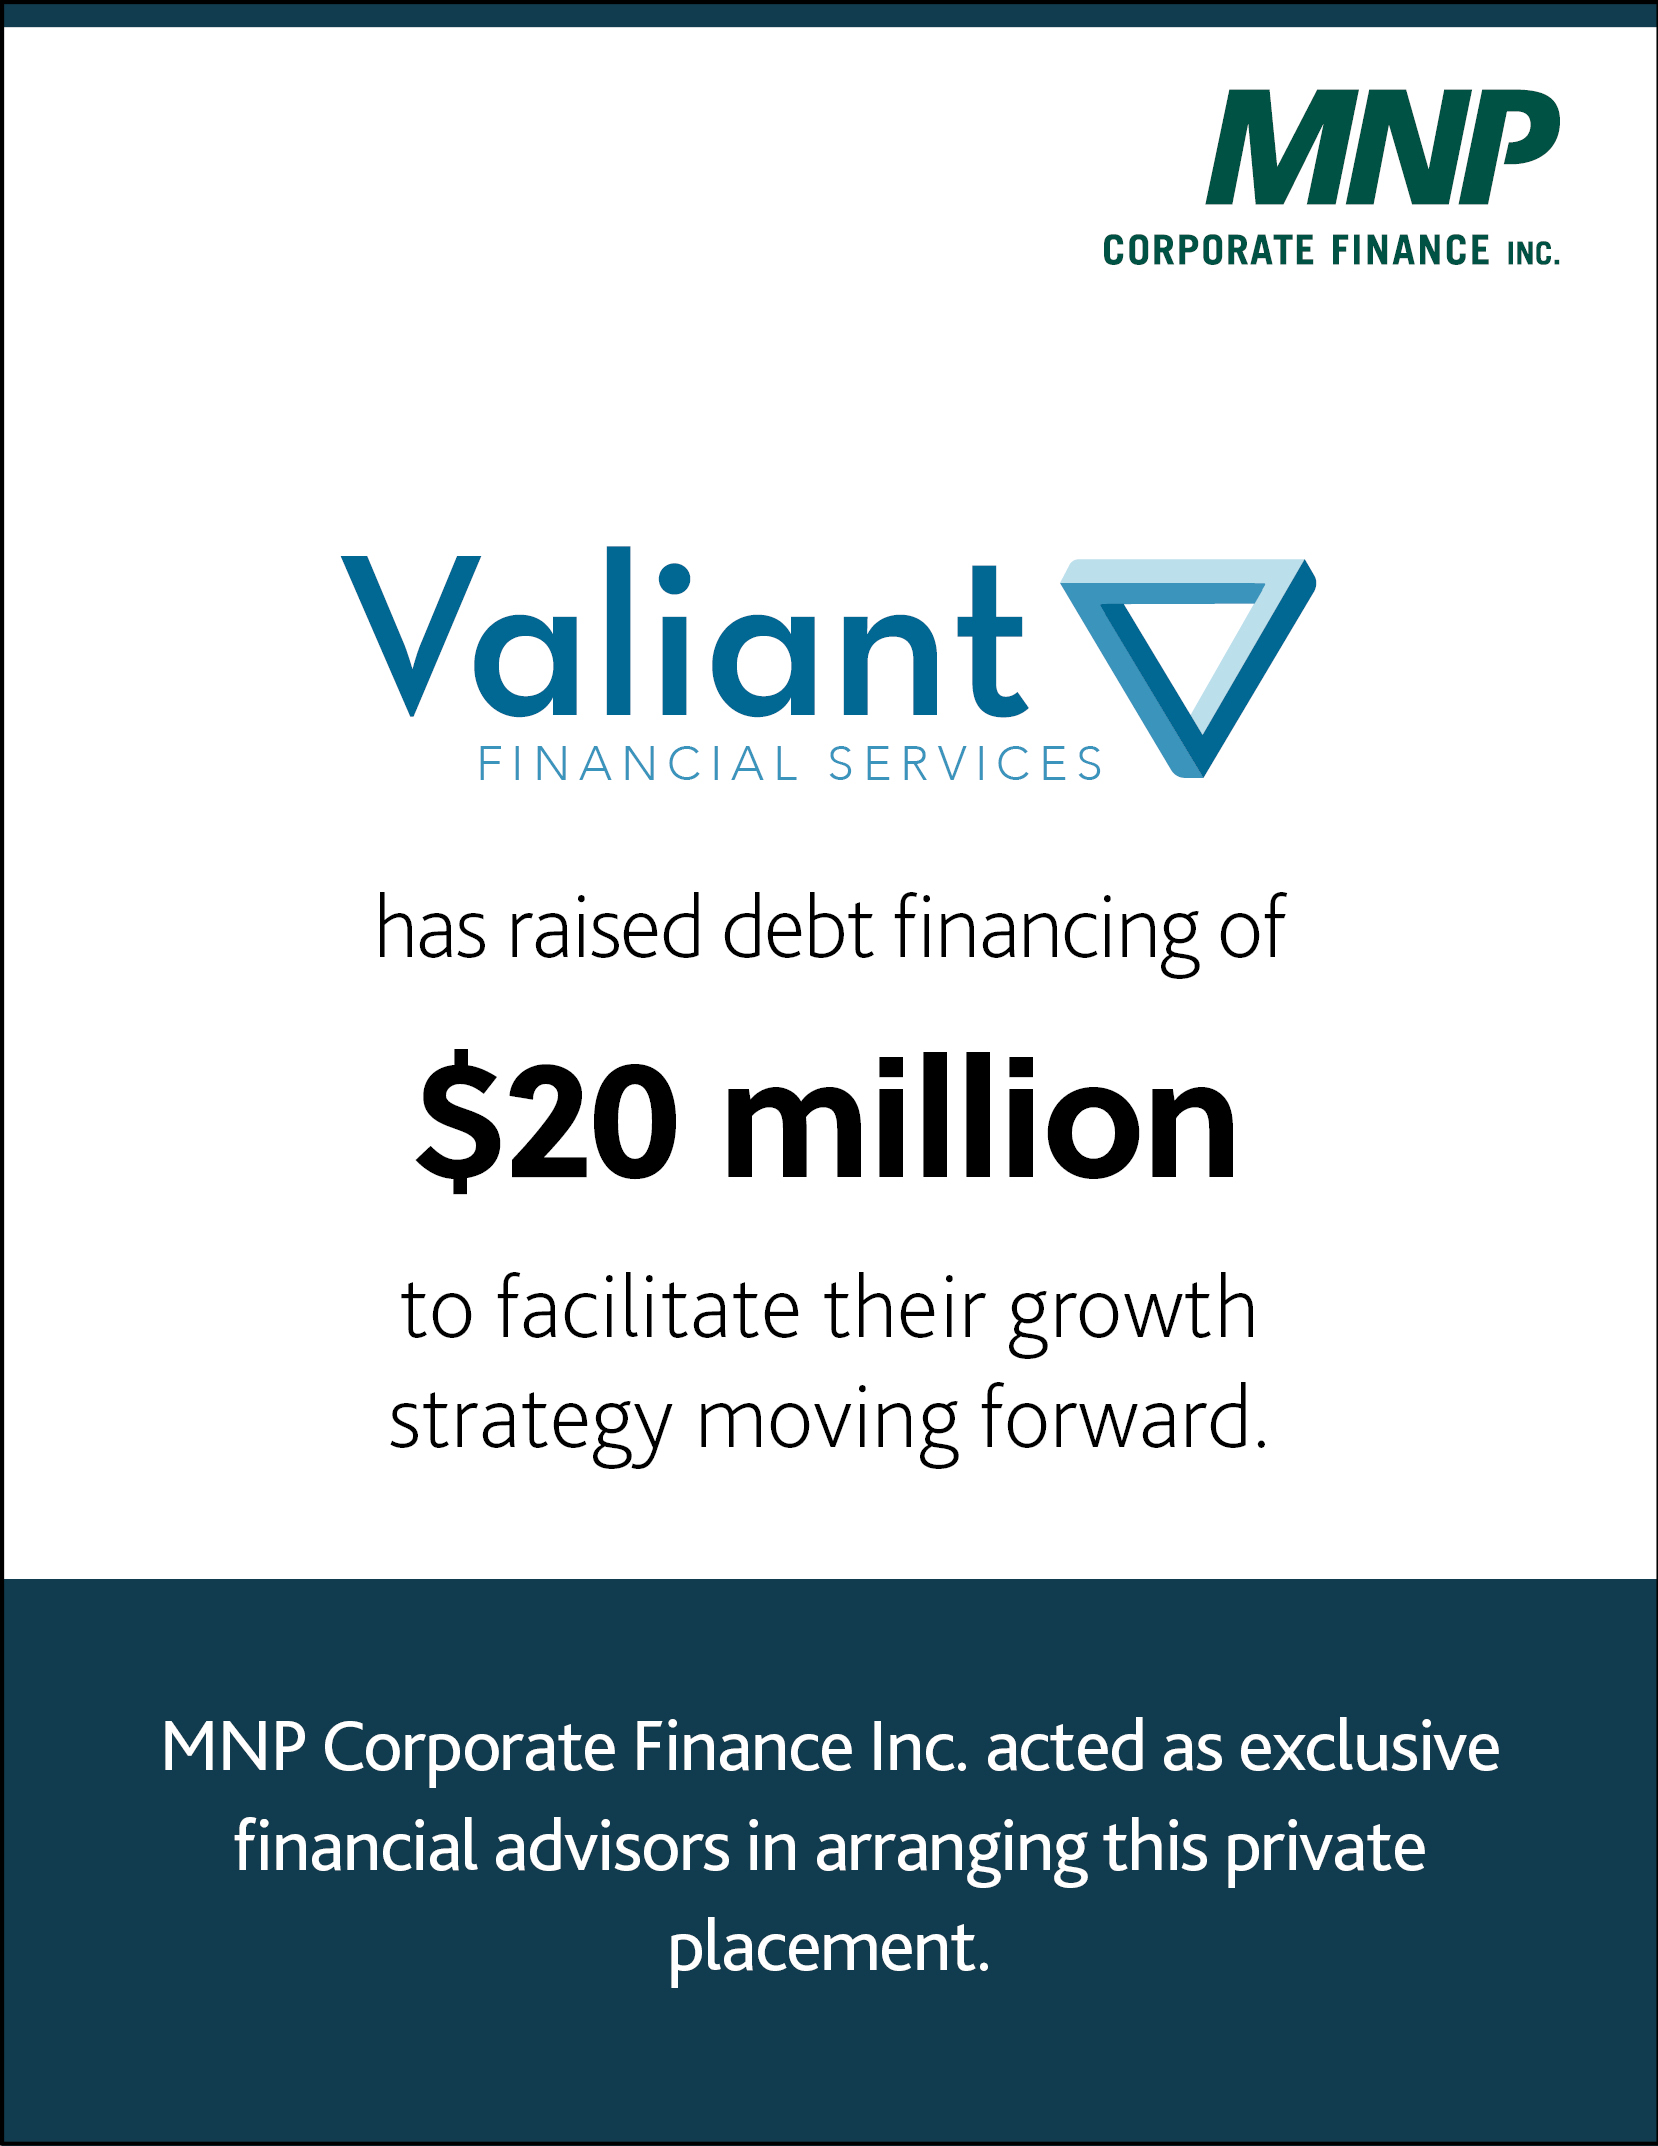 Valiant Financial Services Inc. has raised debt financing of $20 million to facilitate their growth strategy moving forward.